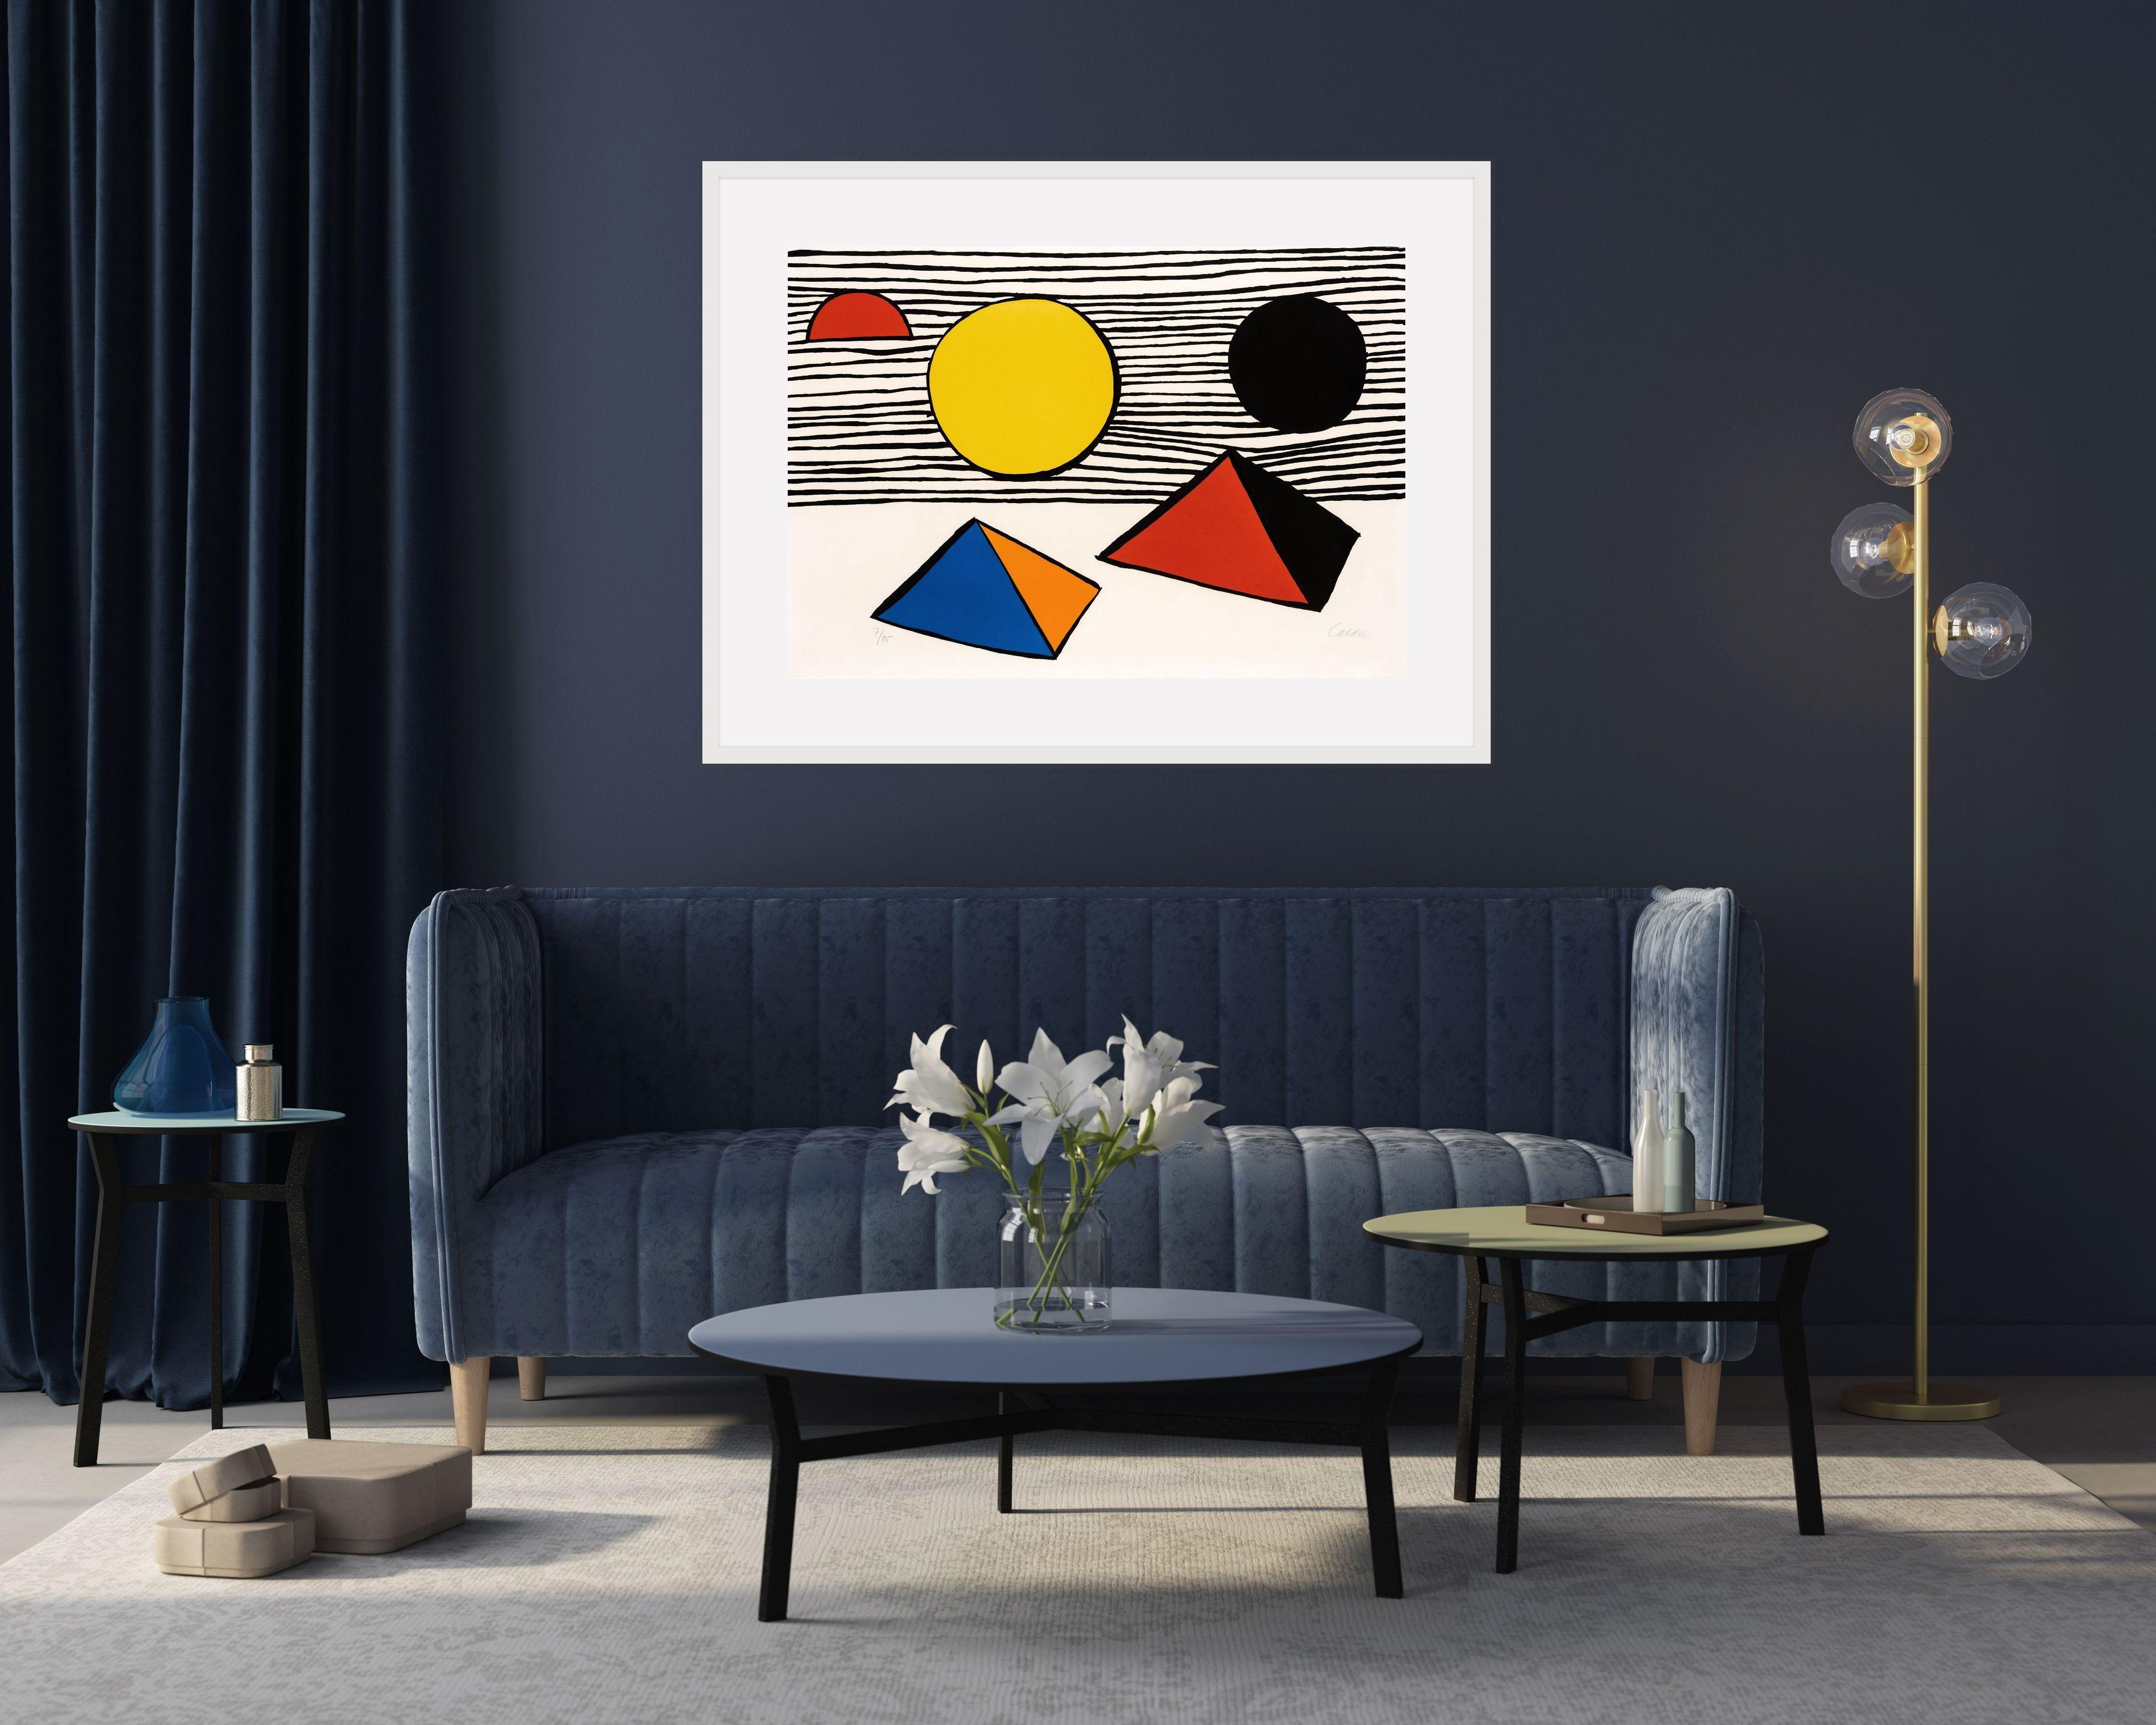 Alexander Calder (1898-1976) has become a household name that is synonymous with twentieth-century abstract art. Calder studied in New York and later in Paris. Calder gained international acclaim for his mobiles, a term coined by artist Marcel